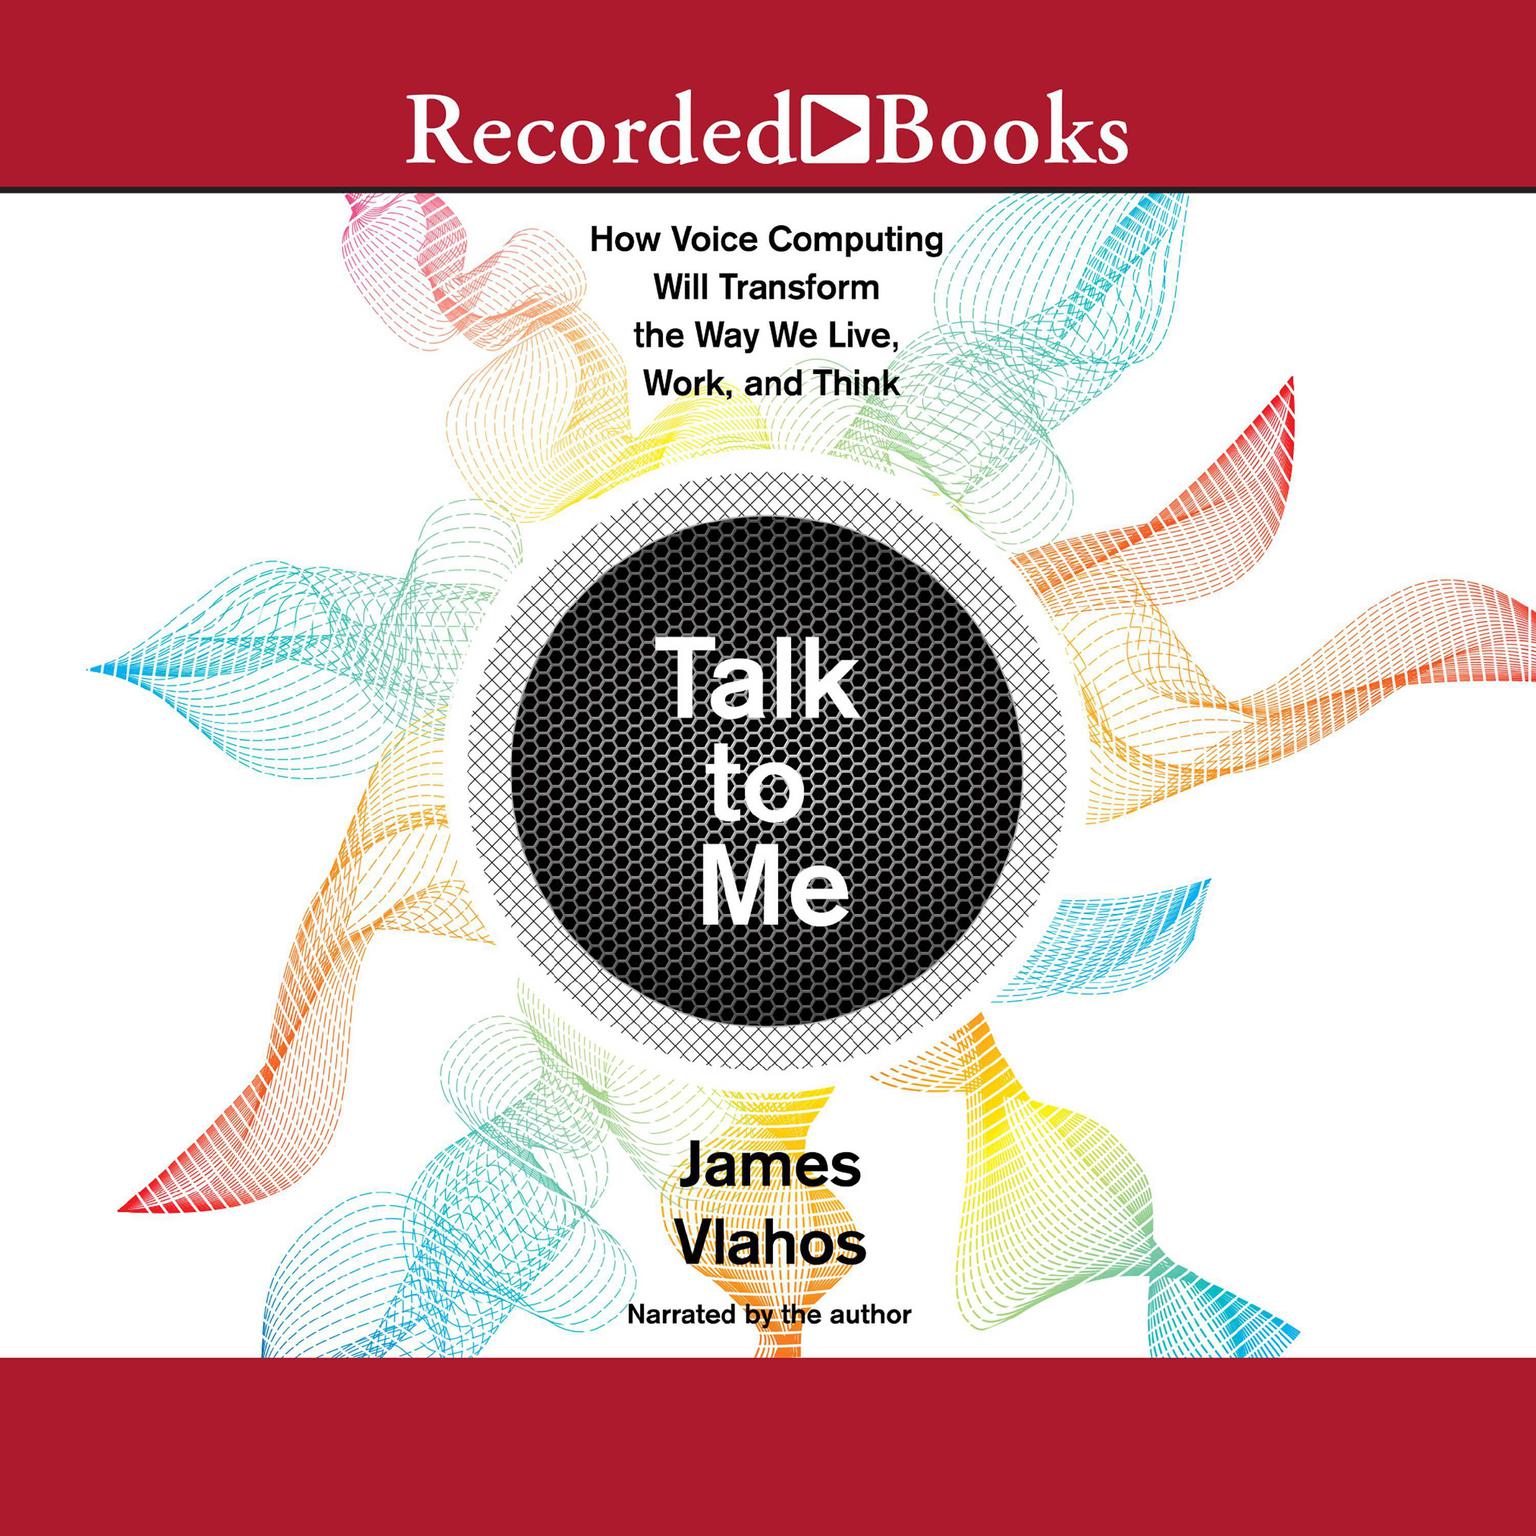 Talk to Me: How Voice Computing Will Transform the Way We Live, Work, and Think Audiobook, by James Vlahos